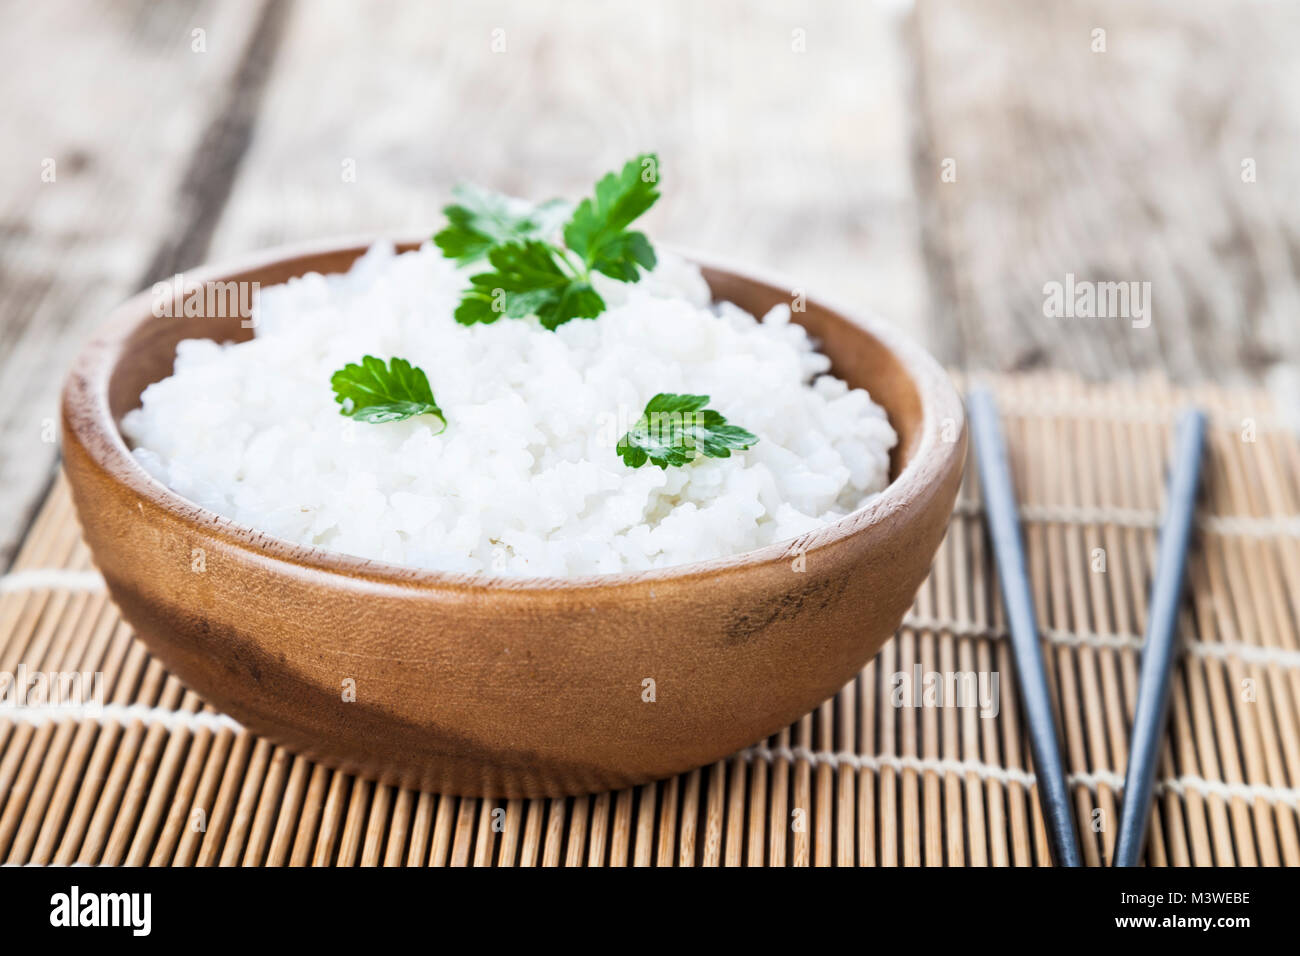 Boiled rice in a wooden bowl and chopsticks on the table. Delicious vegetarian dinner. Stock Photo